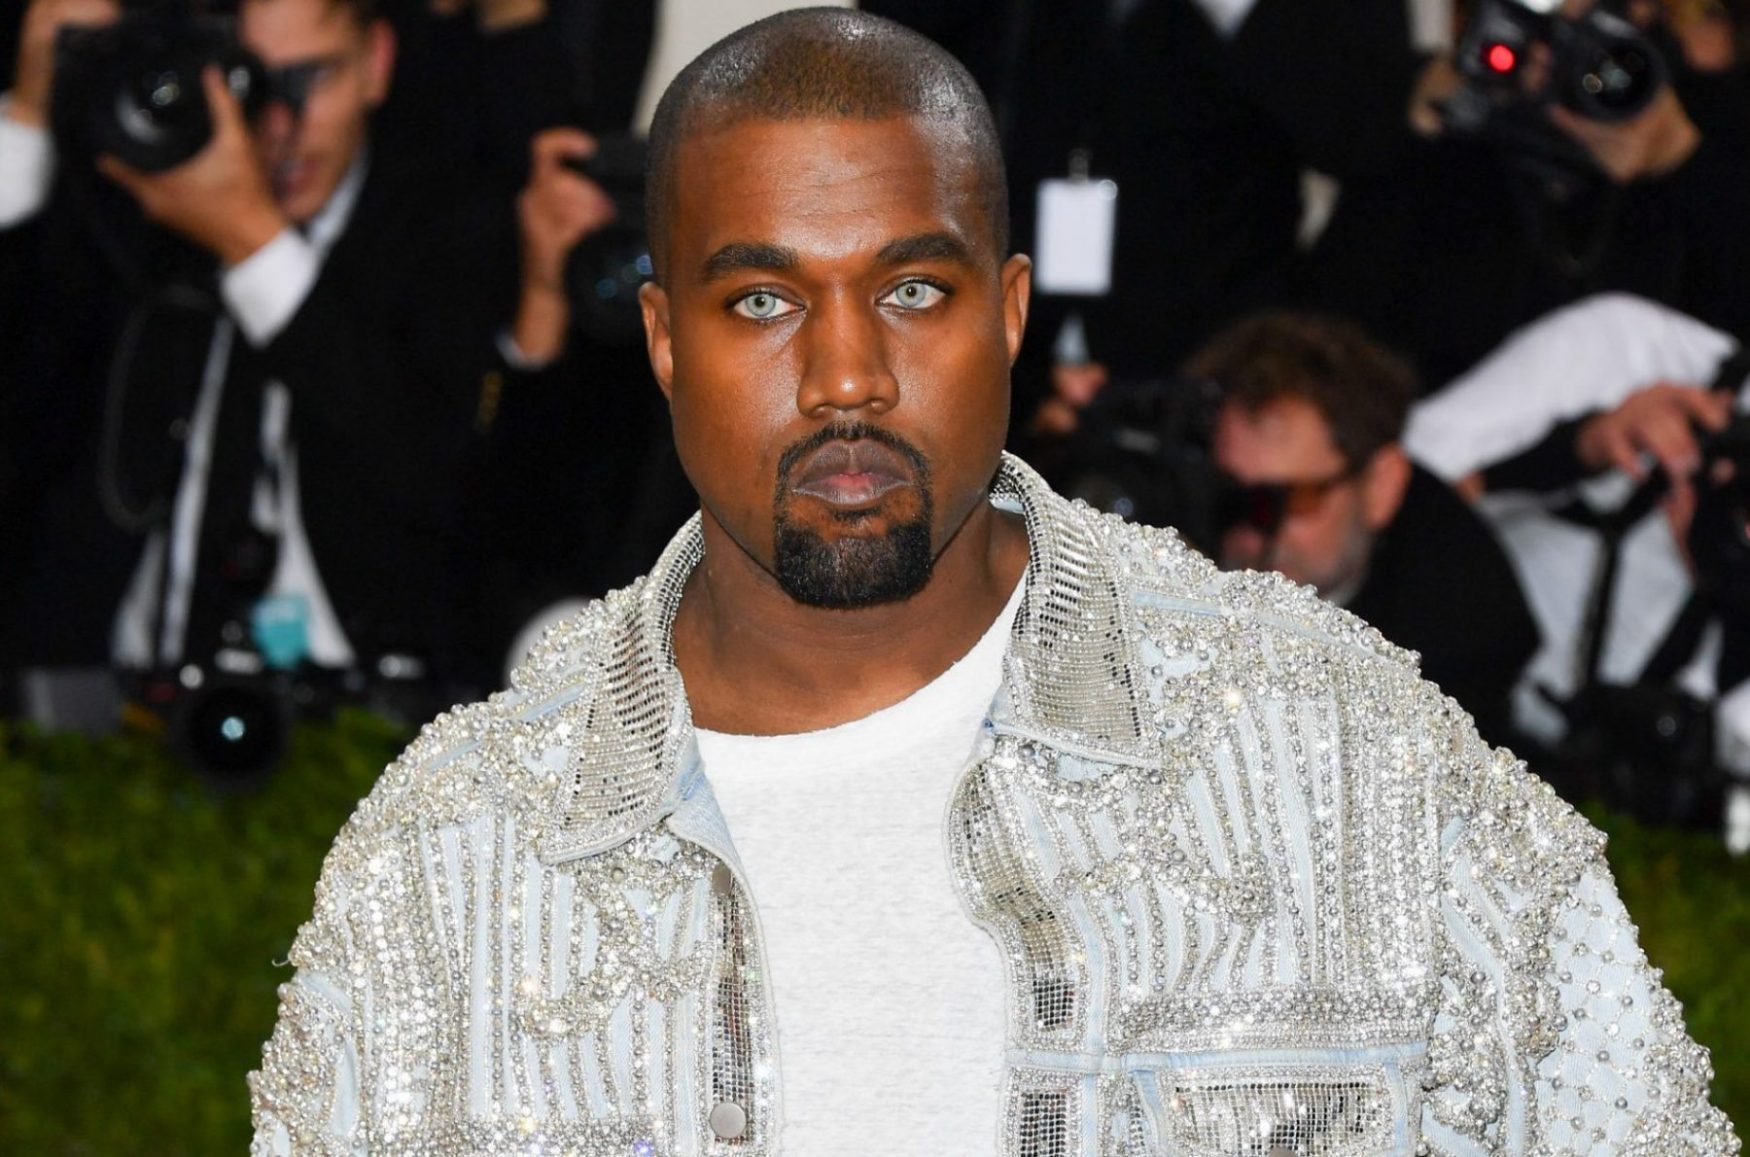 Kanye West at the 2016 Met Gala in New York City.